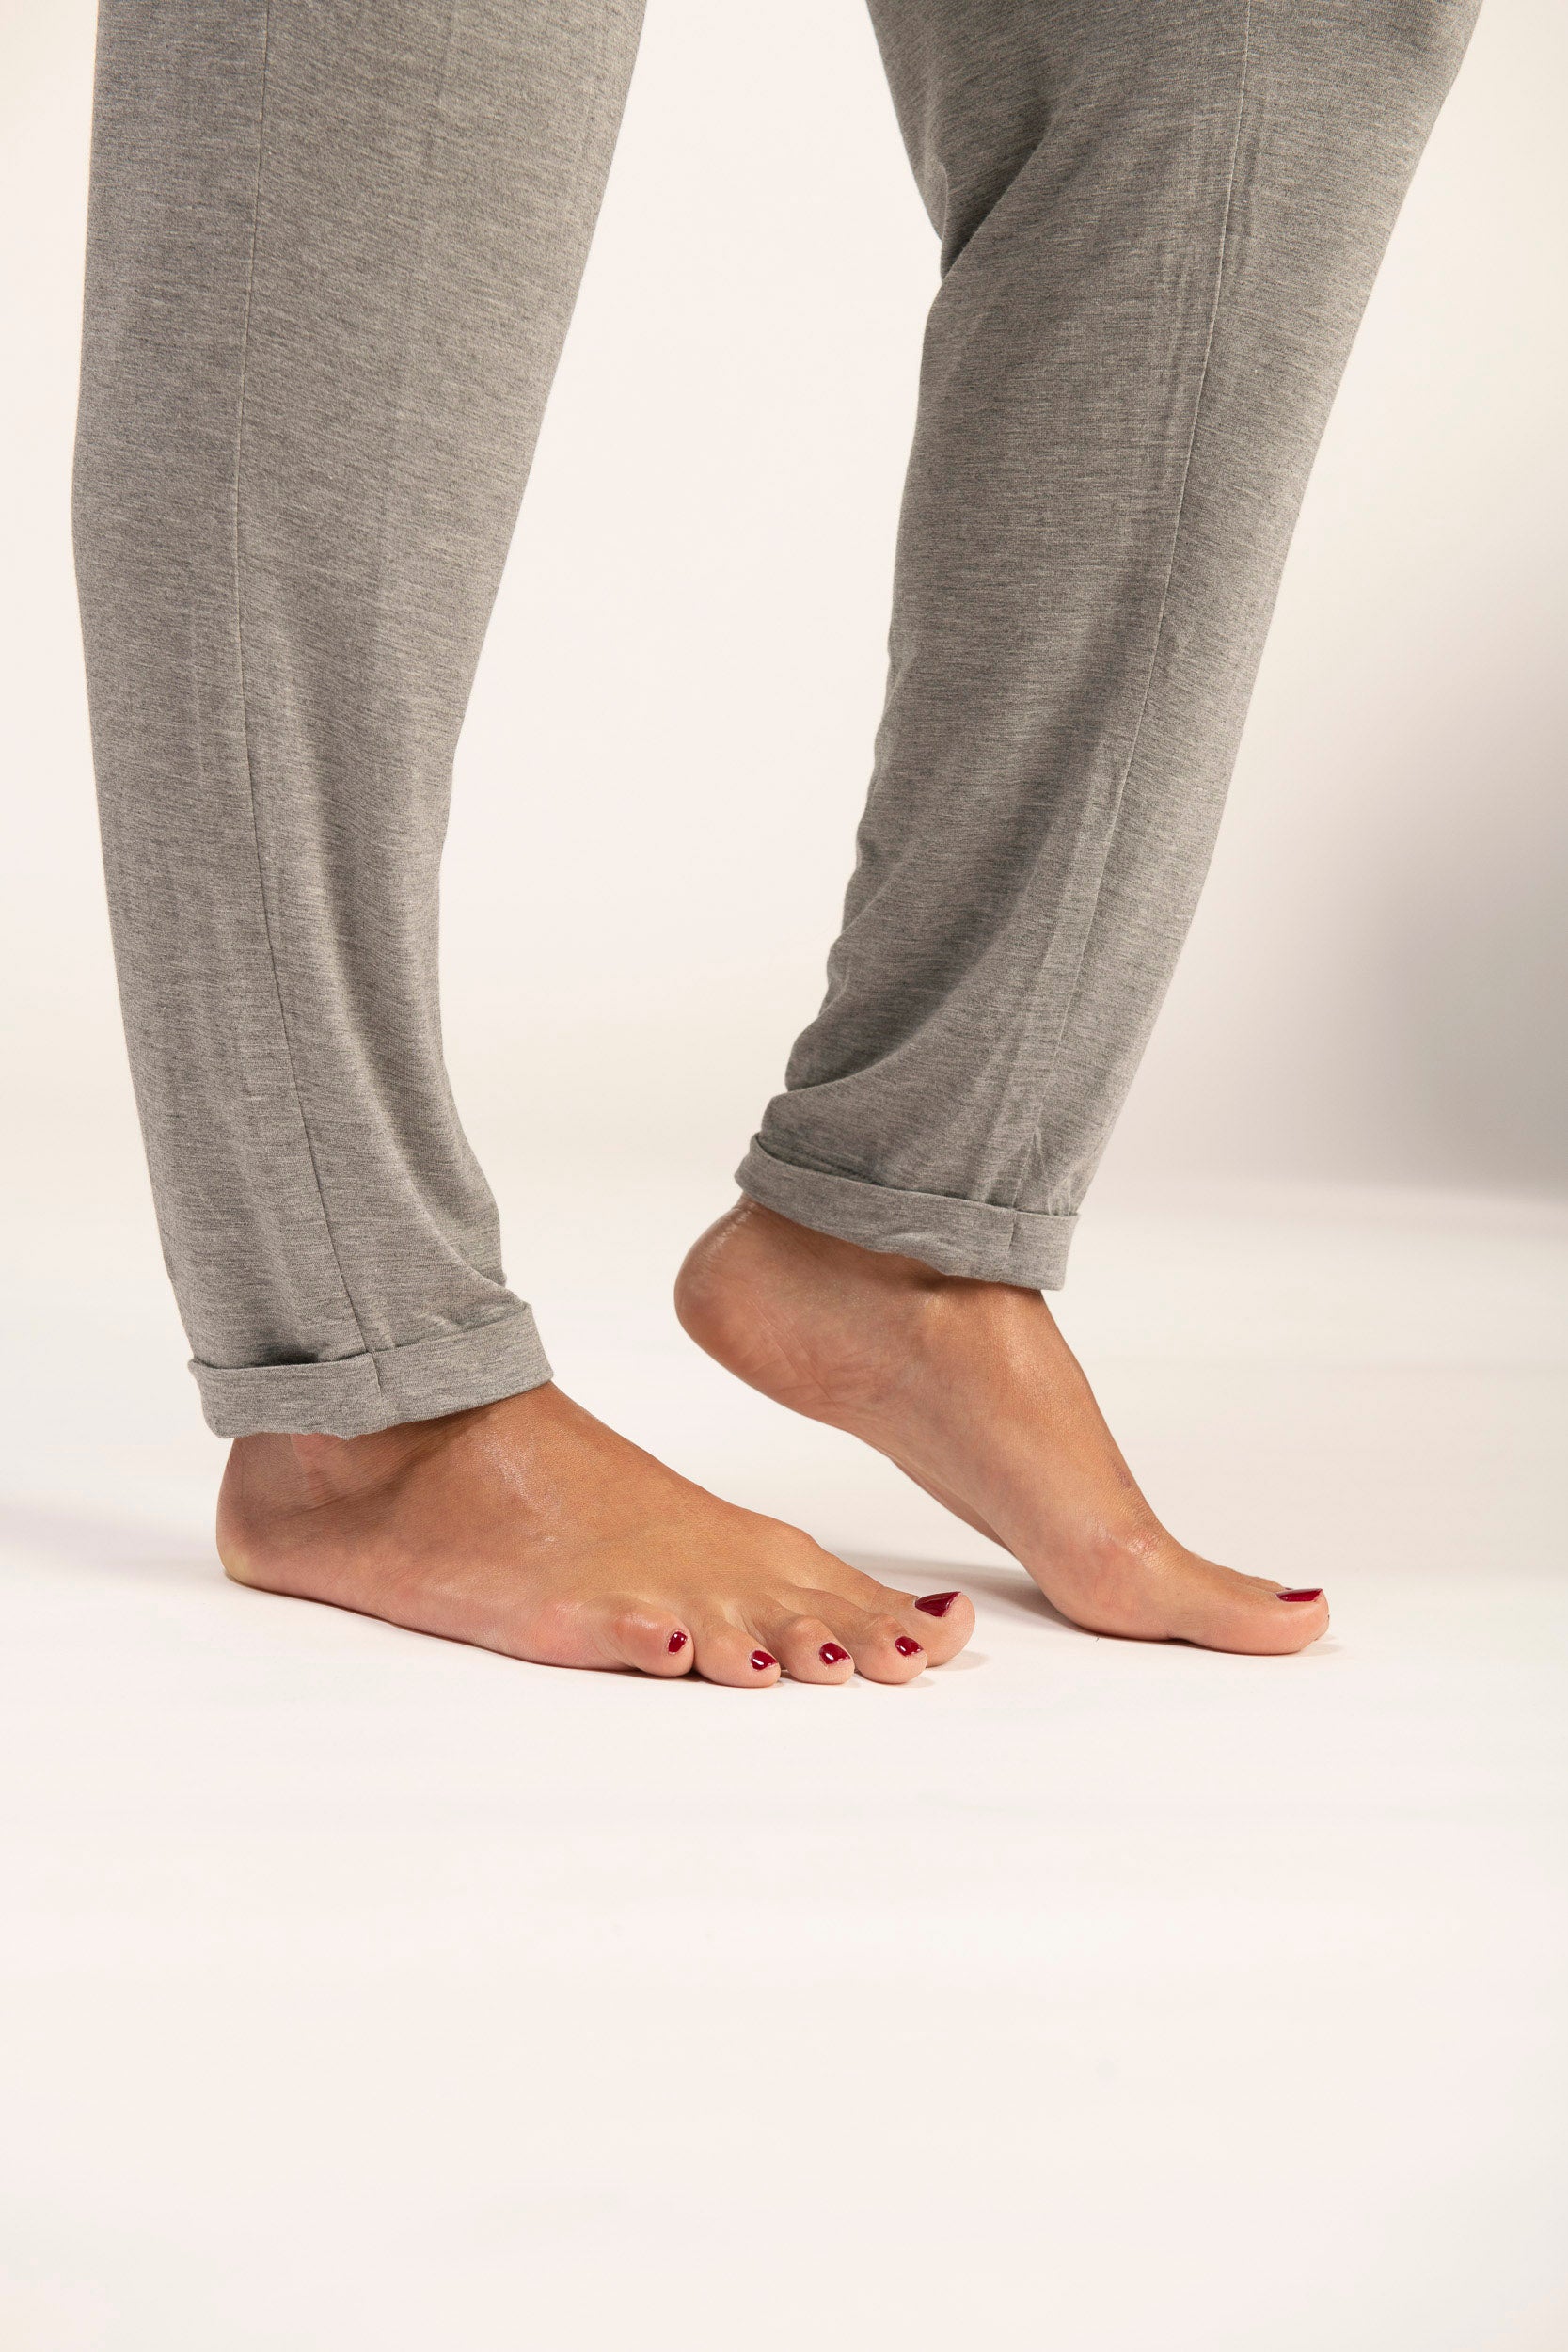  Yogalicious Womens Sherpa Lined Aspen Elite Jogger - Heather  Grey - XS : Clothing, Shoes & Jewelry